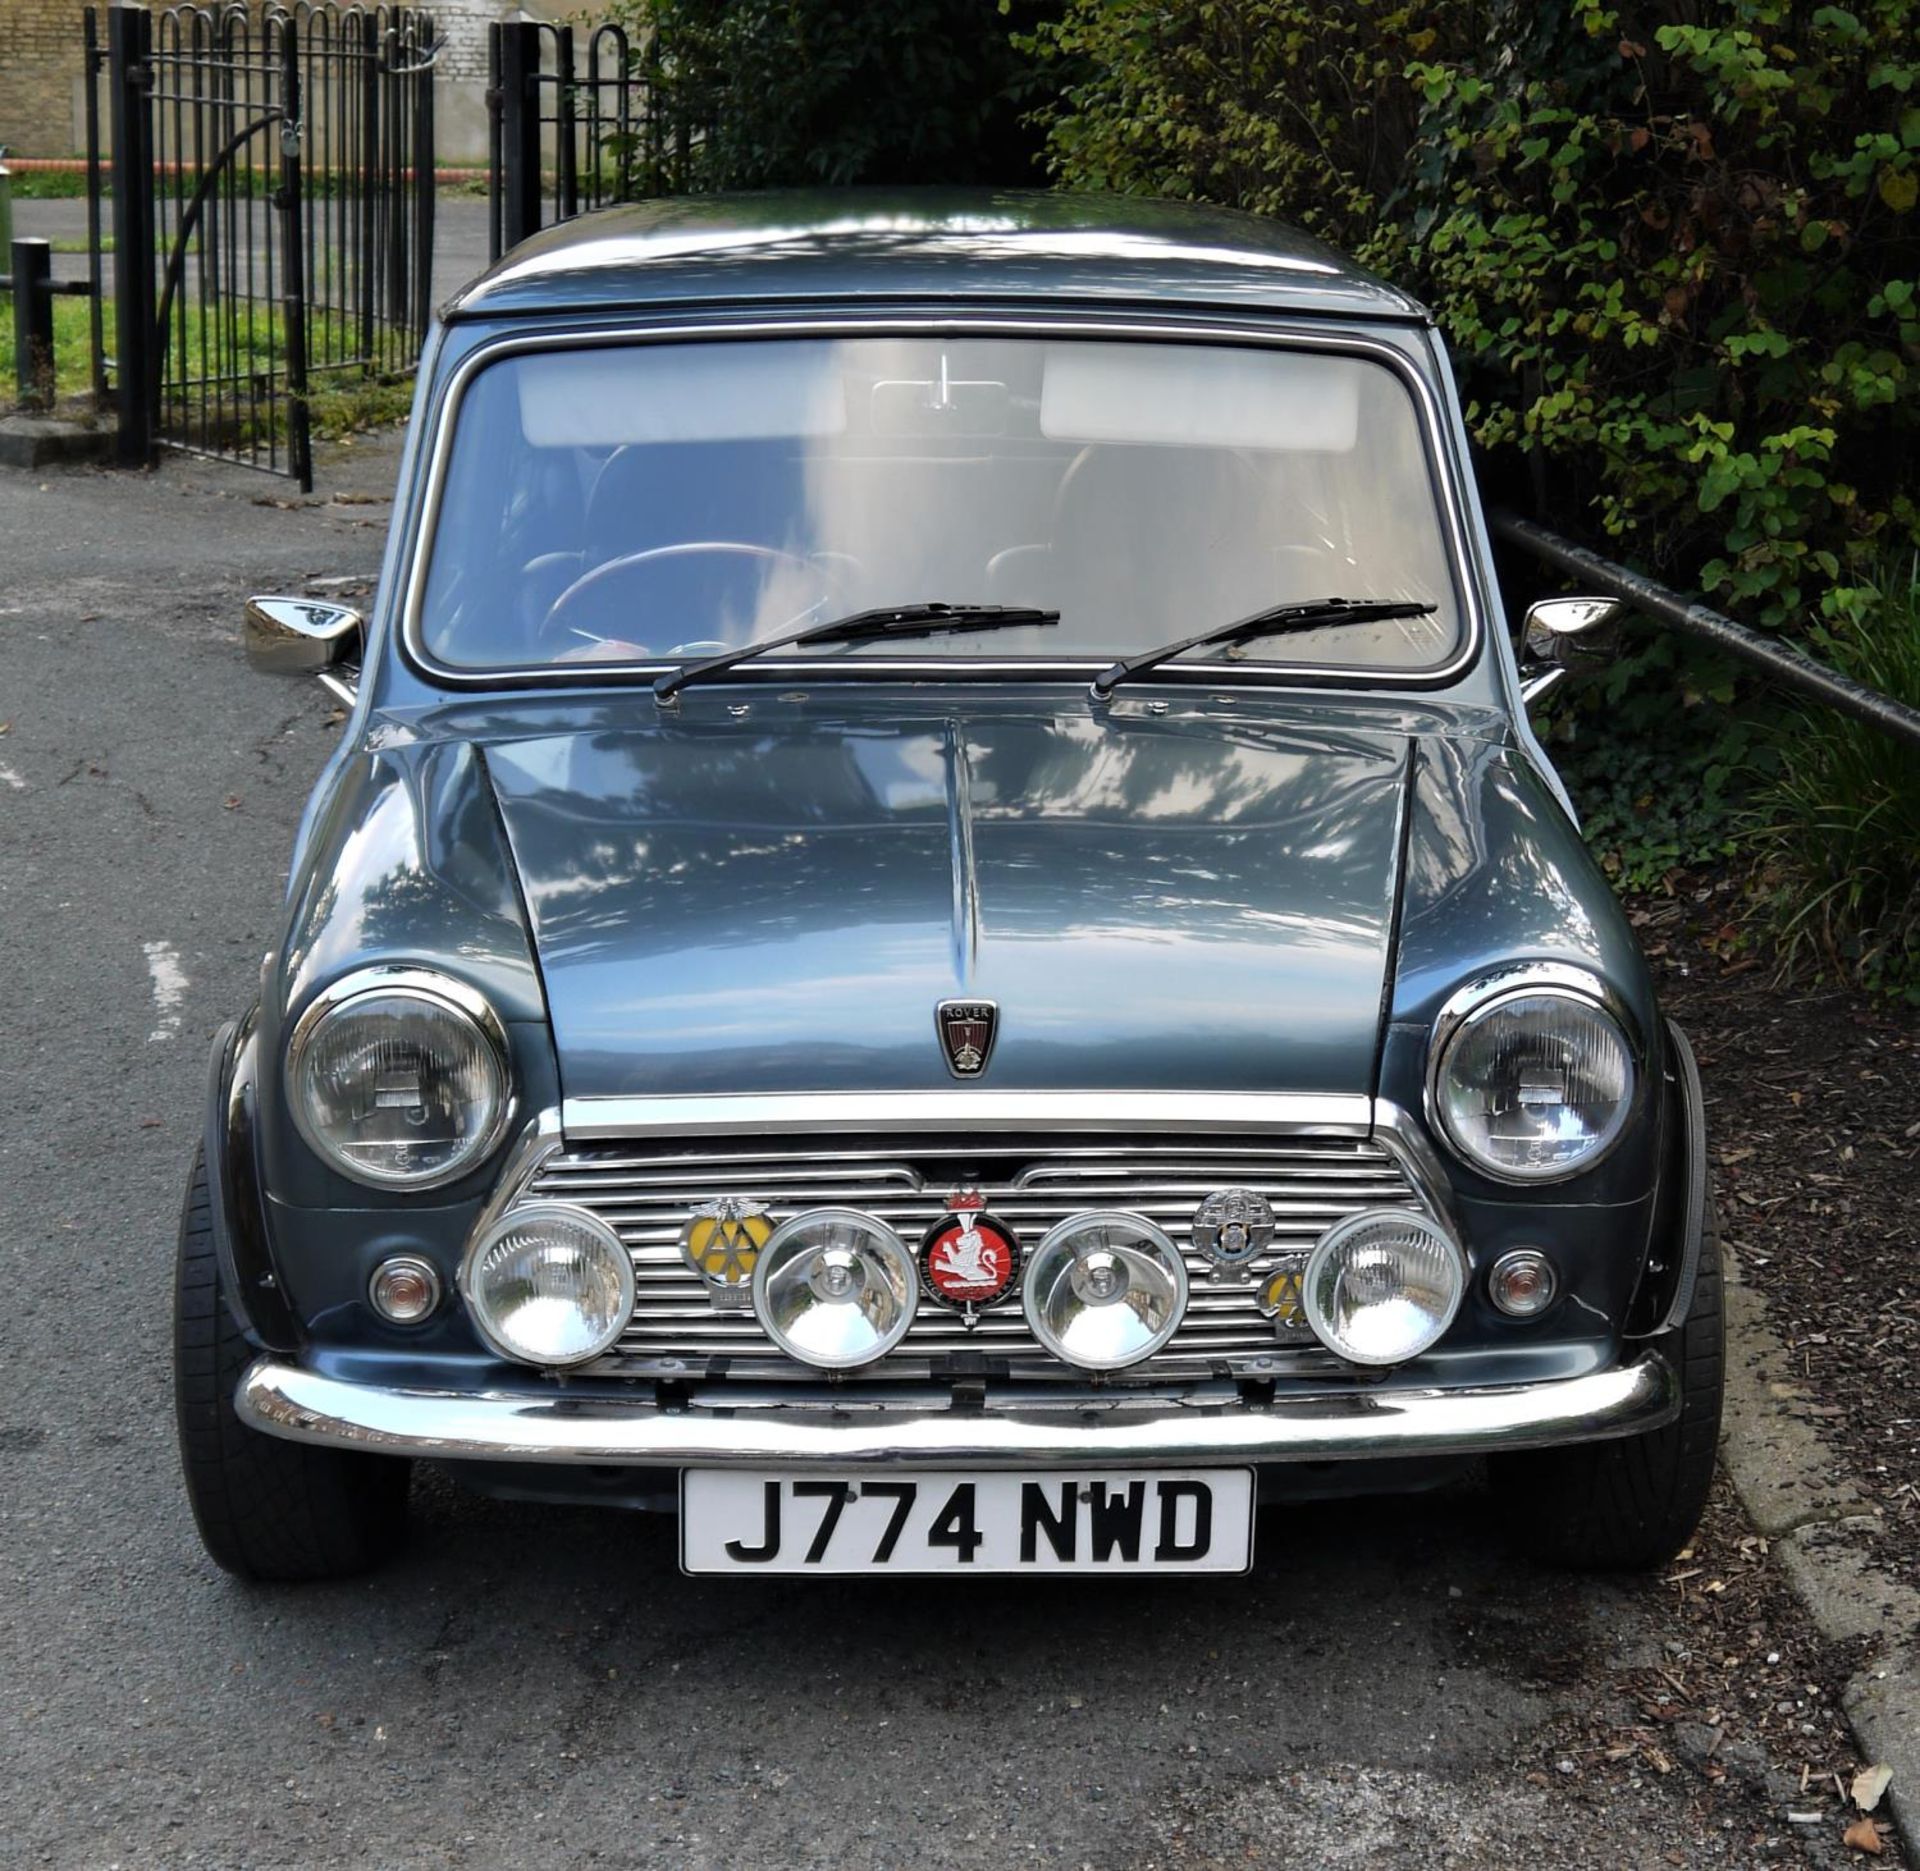 1991 ROVER MINI NEON Registration Number: J774 NWD Recorded Mileage: 58,000 miles Chassis Number: - Image 4 of 24